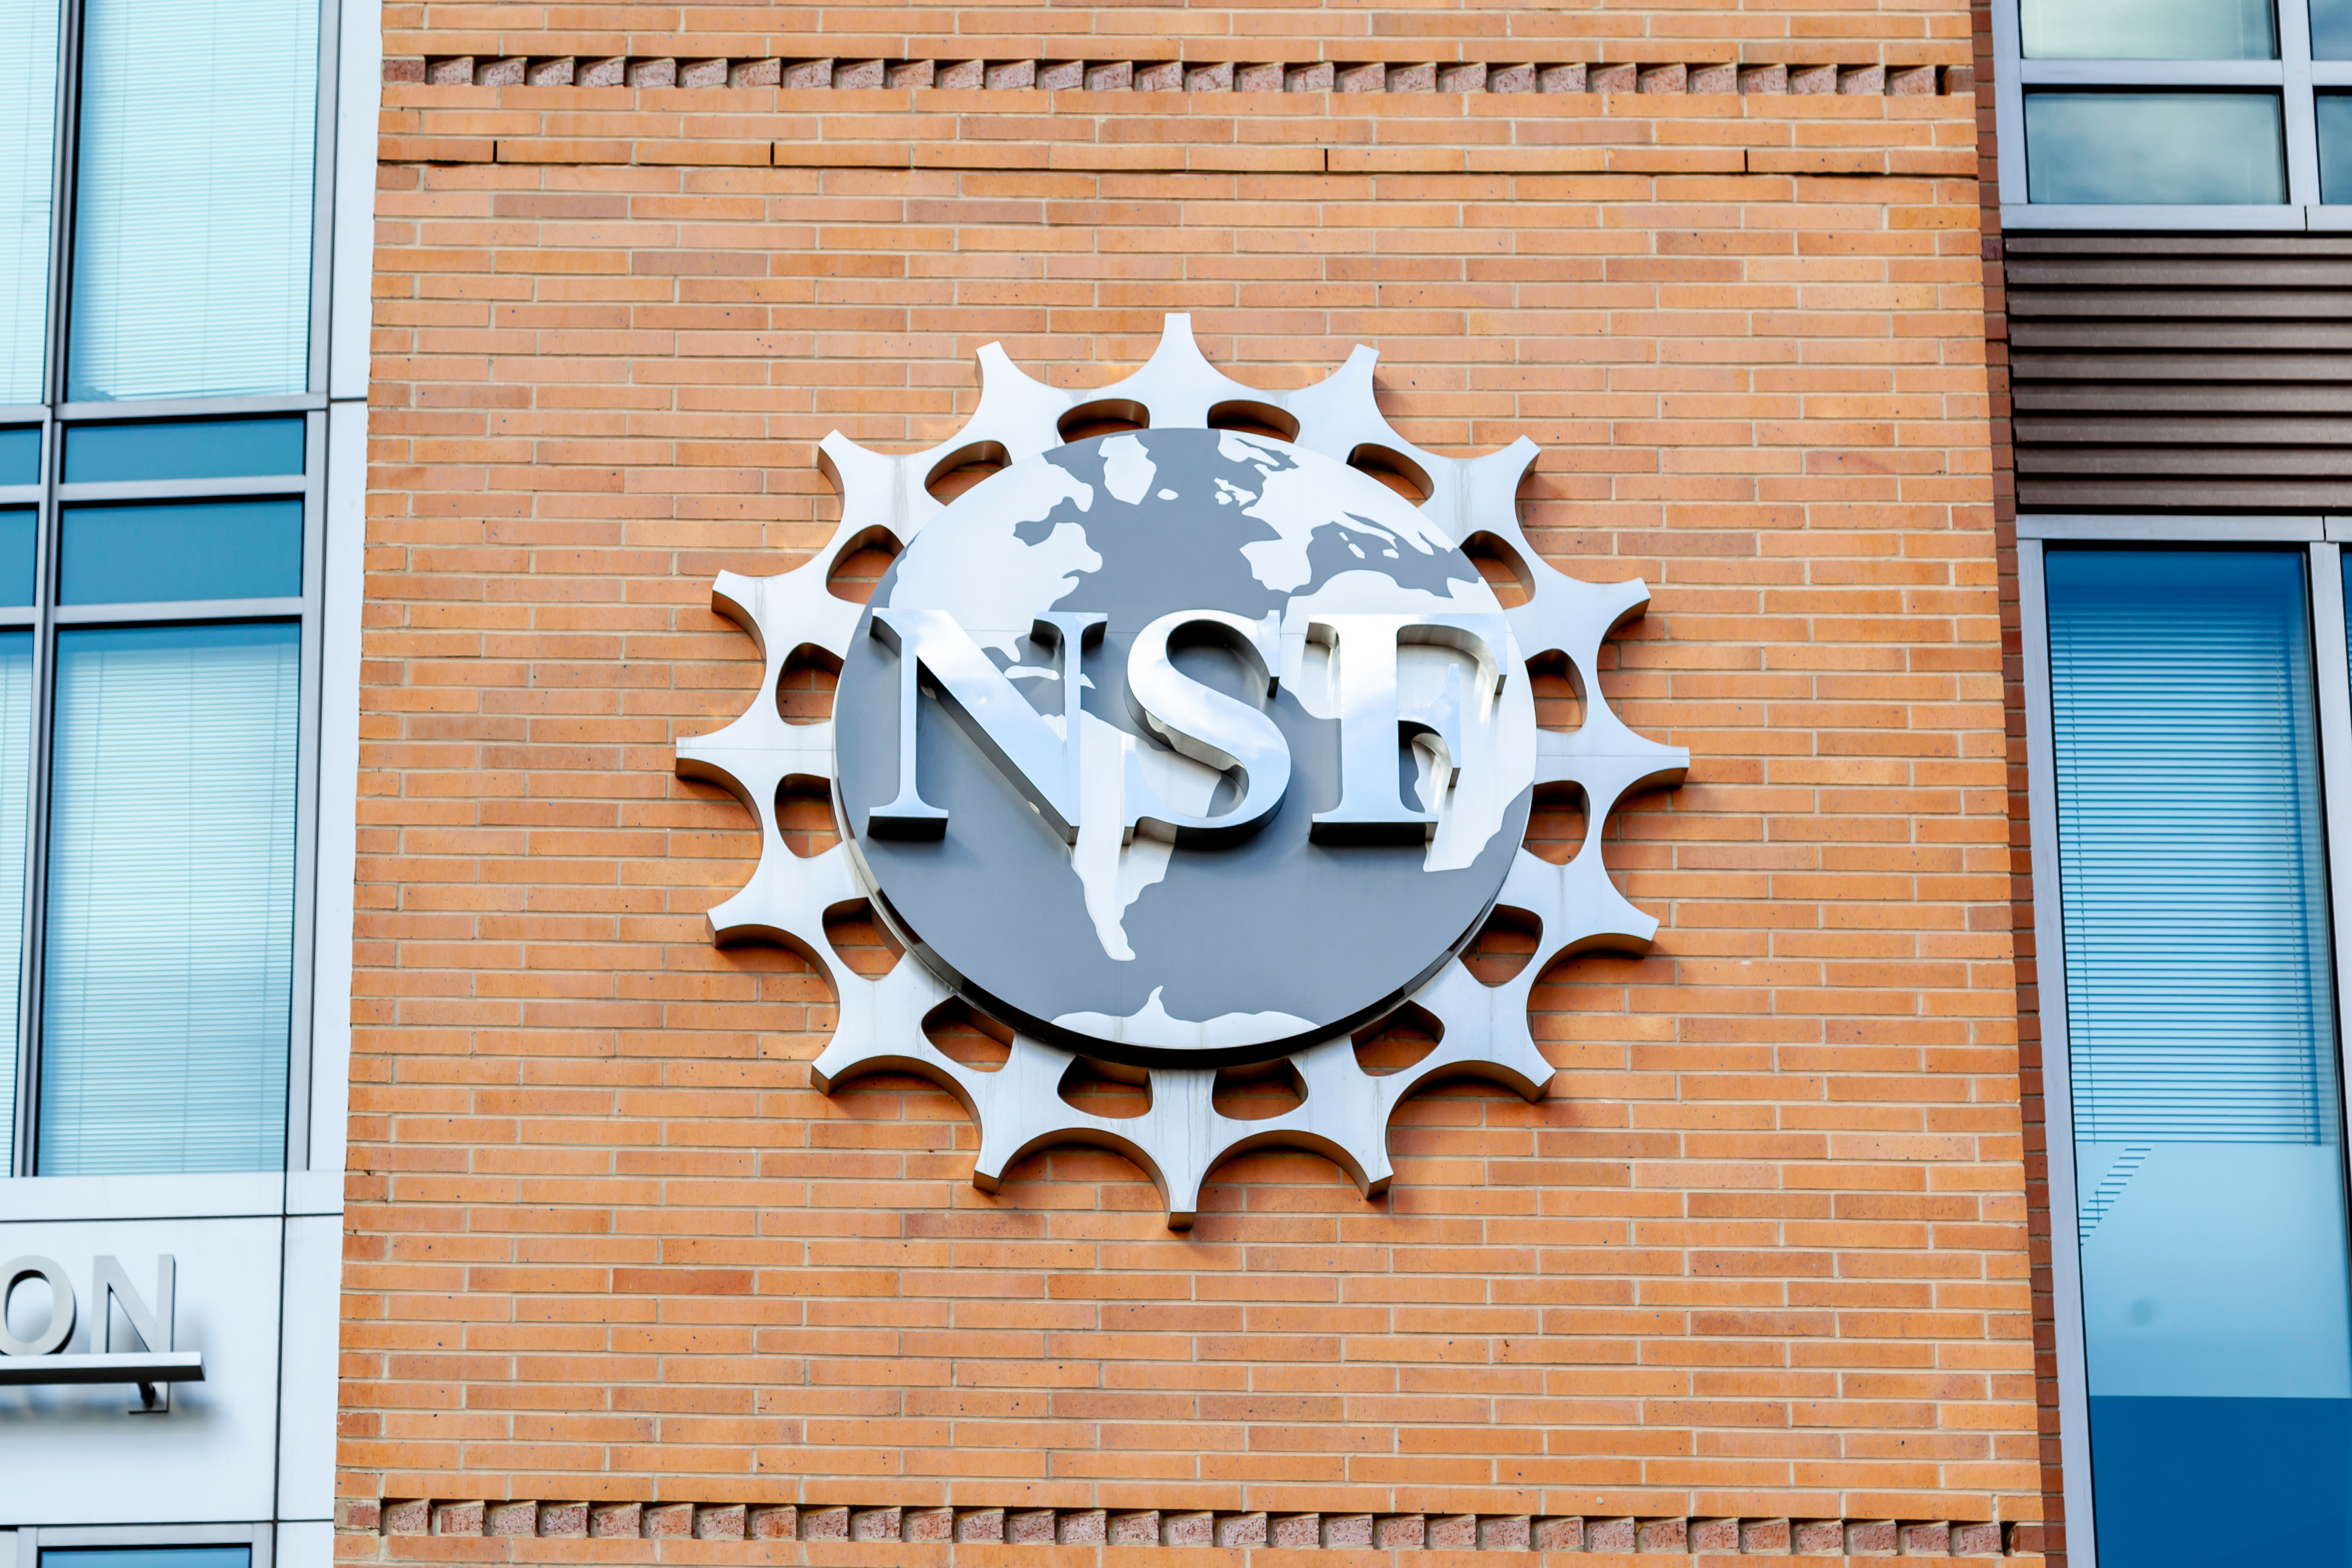 National Science Foundation's seal on building in Washington, D.C.